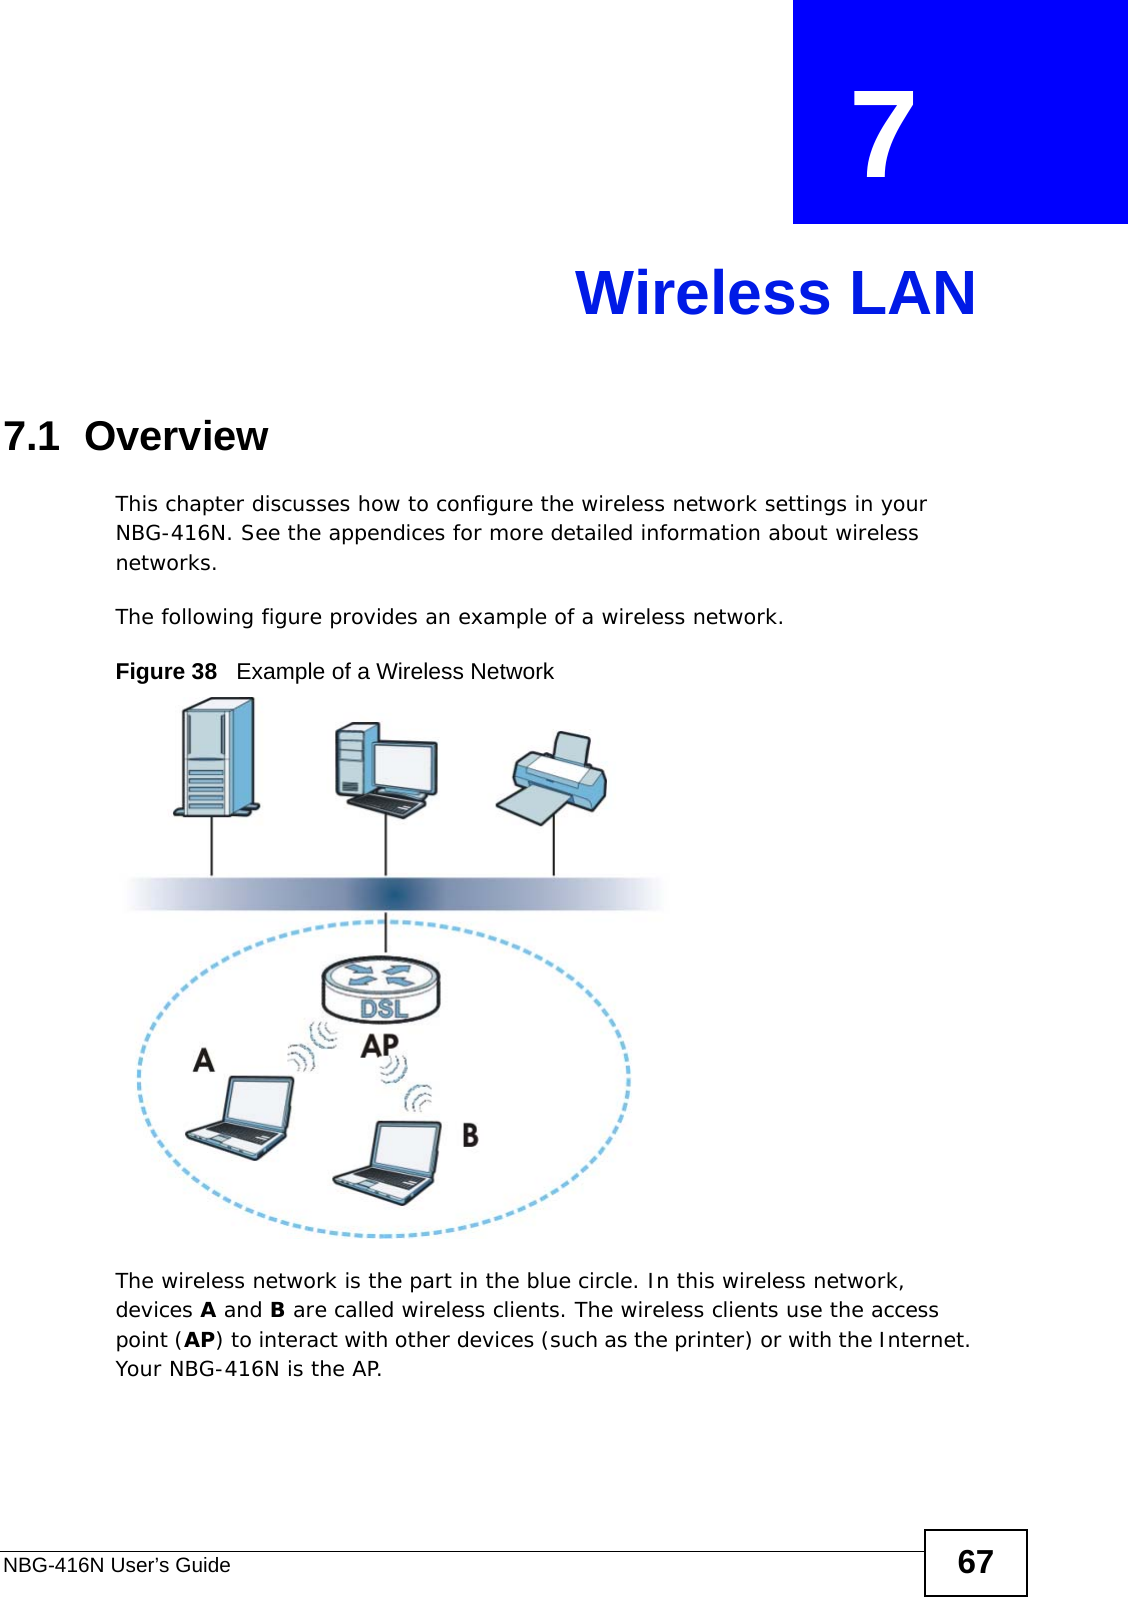 NBG-416N User’s Guide 67CHAPTER  7 Wireless LAN7.1  OverviewThis chapter discusses how to configure the wireless network settings in your NBG-416N. See the appendices for more detailed information about wireless networks.The following figure provides an example of a wireless network.Figure 38   Example of a Wireless NetworkThe wireless network is the part in the blue circle. In this wireless network, devices A and B are called wireless clients. The wireless clients use the access point (AP) to interact with other devices (such as the printer) or with the Internet. Your NBG-416N is the AP.